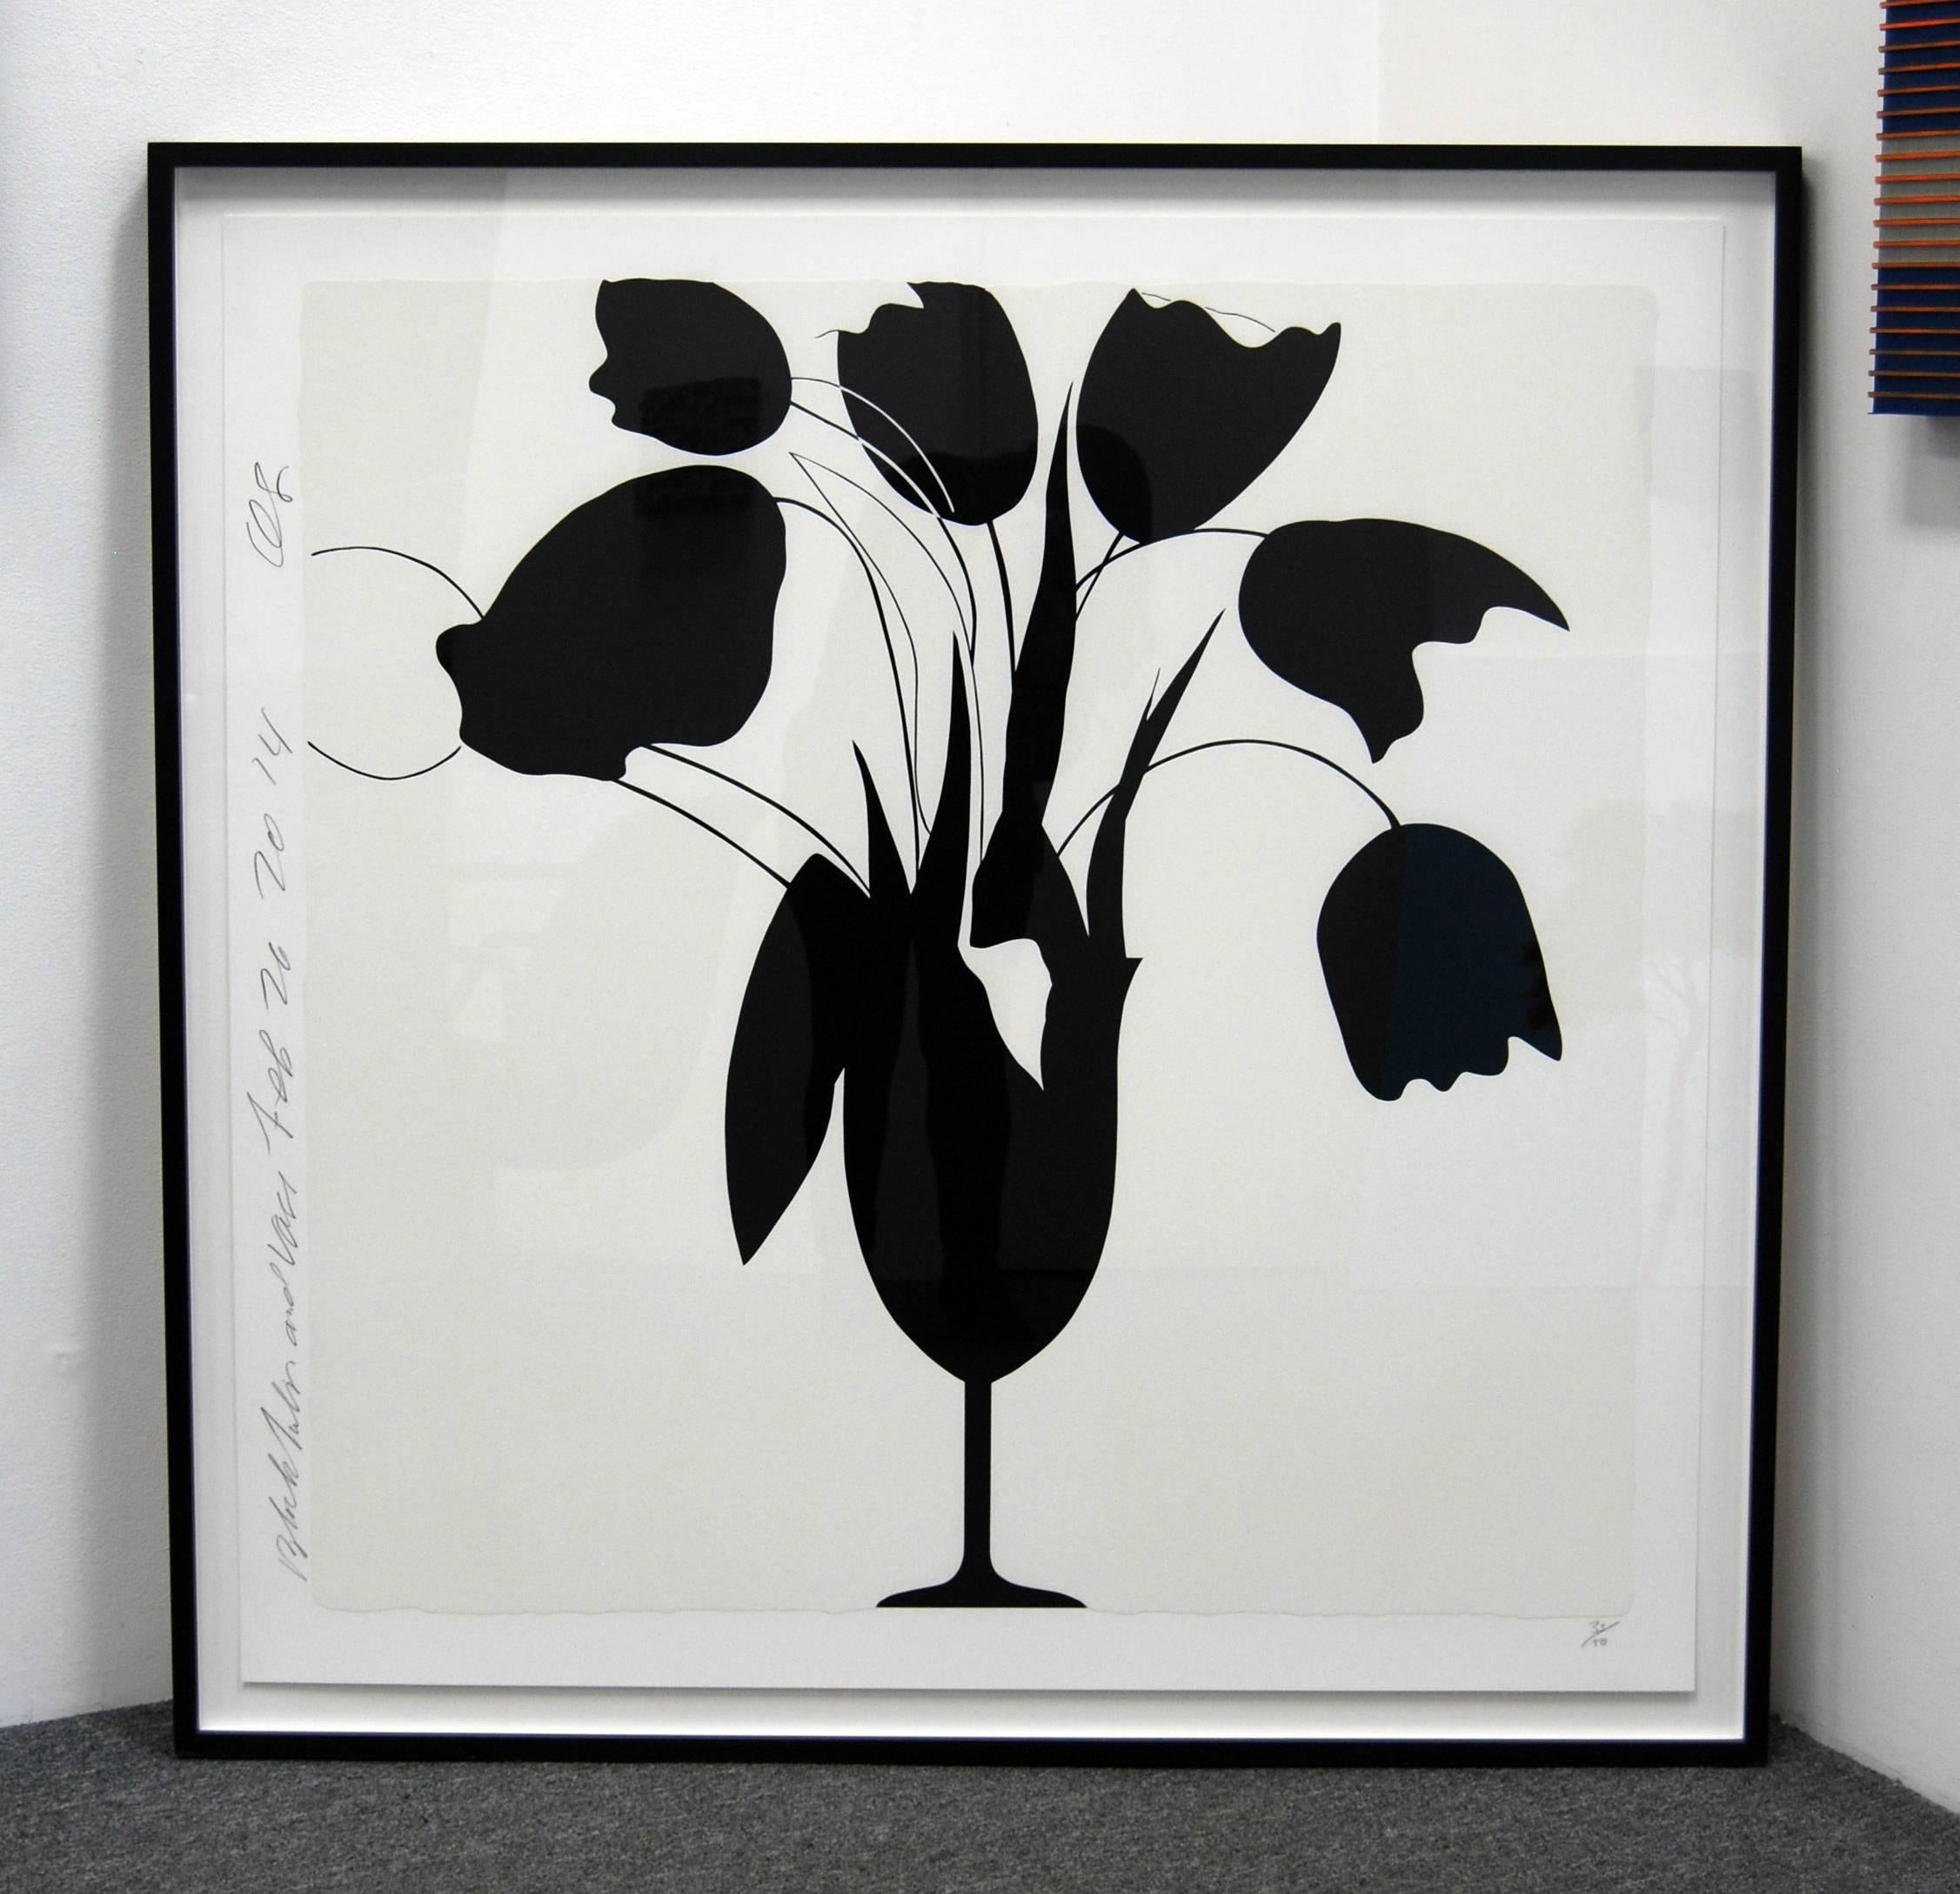 Black Tulips and Vase, White Tulips and Vase  - Contemporary Print by Donald Sultan